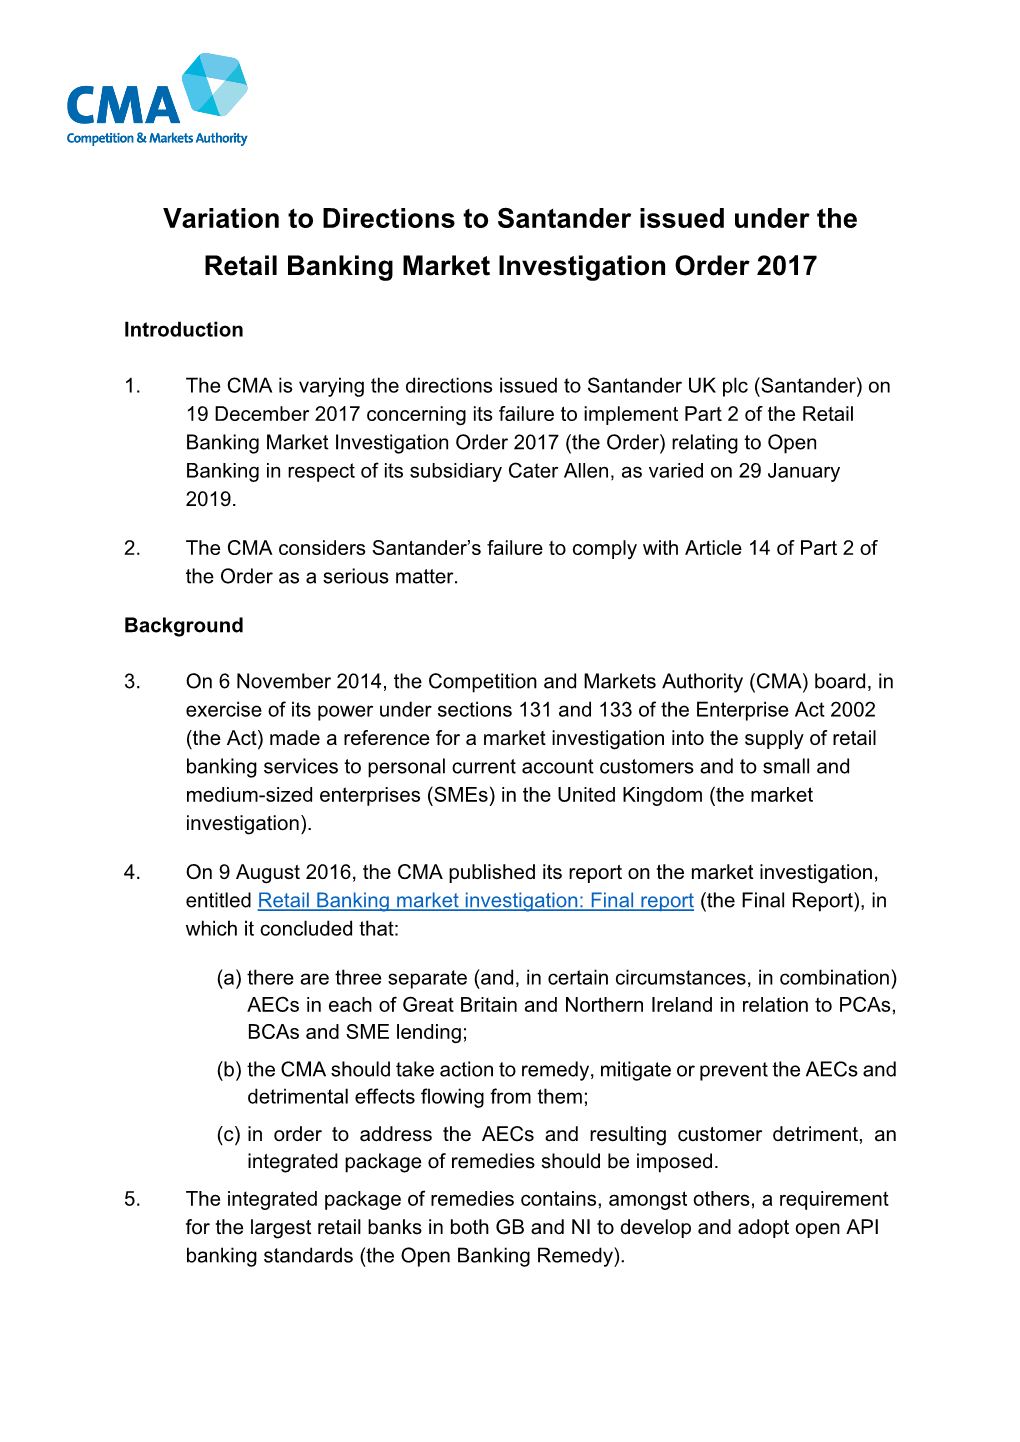 Variation to Directions to Santander Issued Under the Retail Banking Market Investigation Order 2017